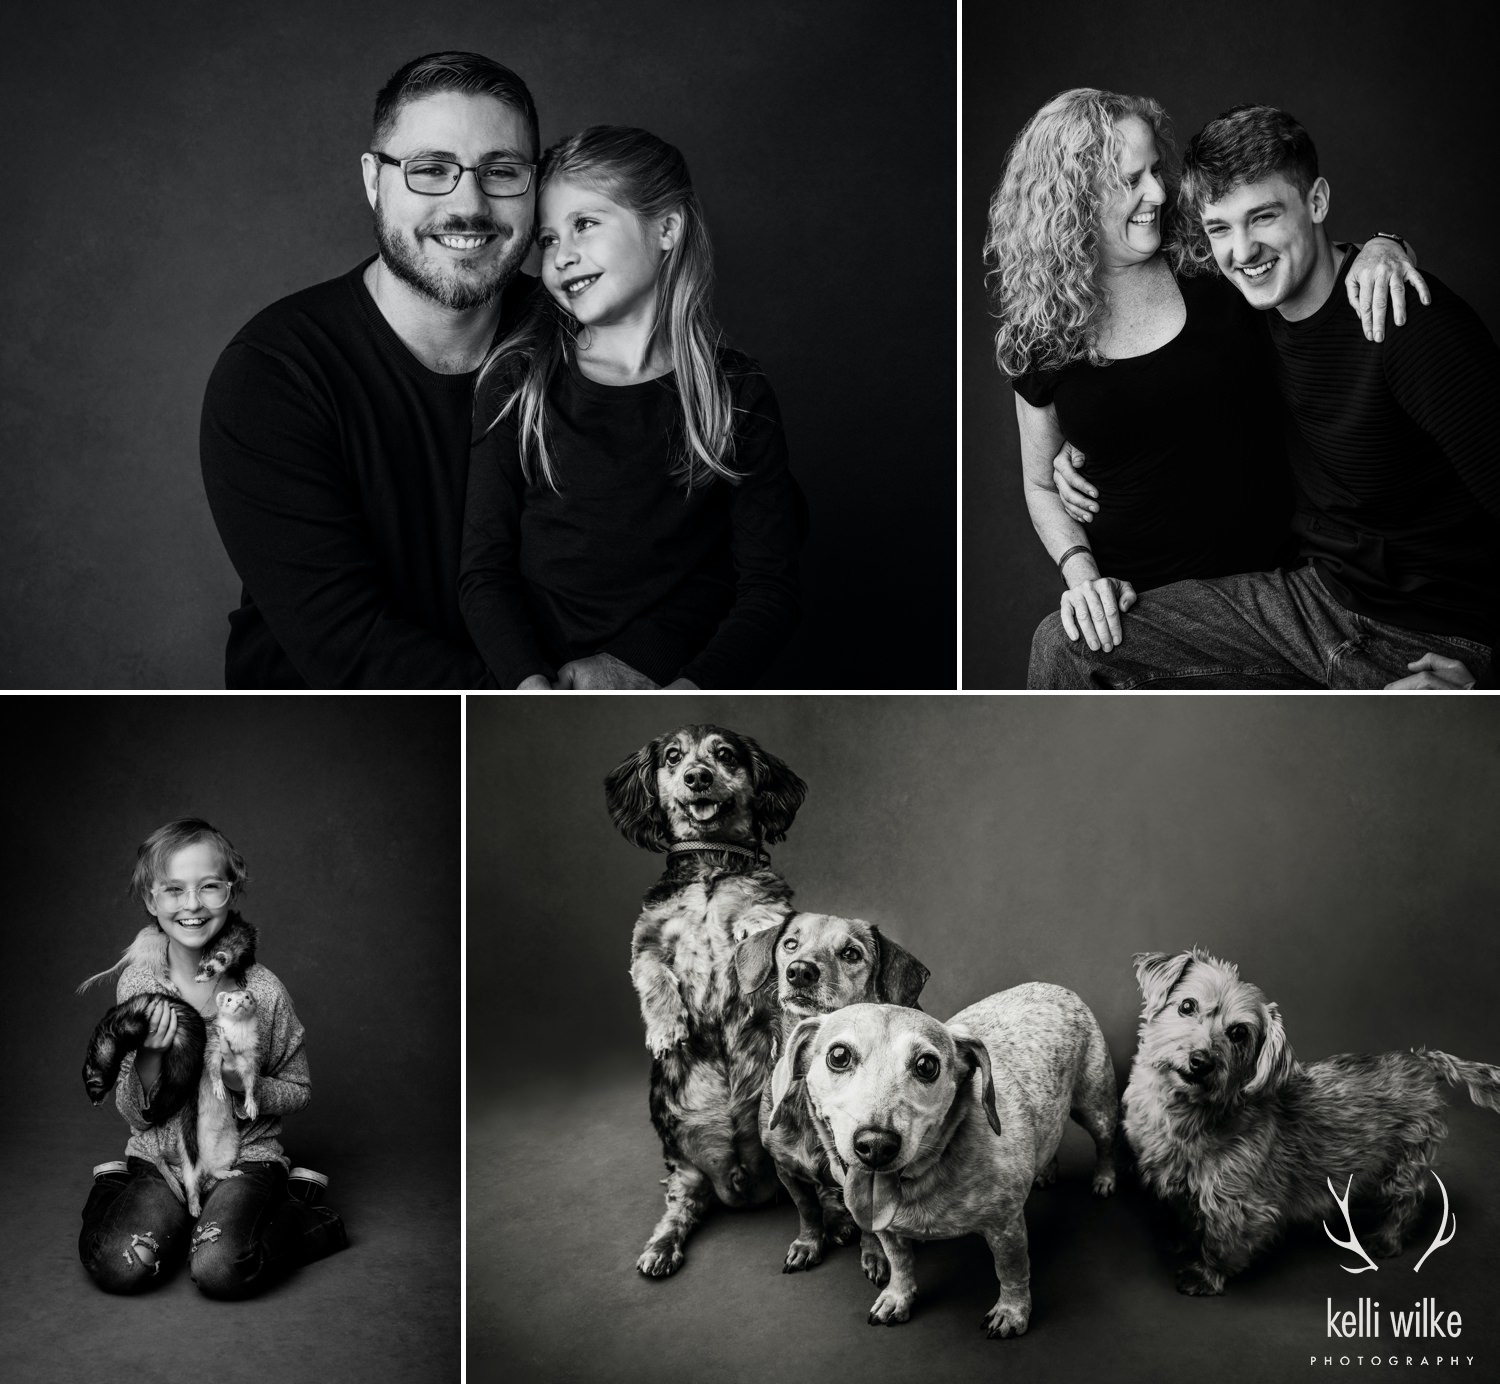 A collage of 4 black and white photos, a father and his daughter, a mom and her teenage son, a little girl with 3 ferrets, and a group of 4 small dogs. 